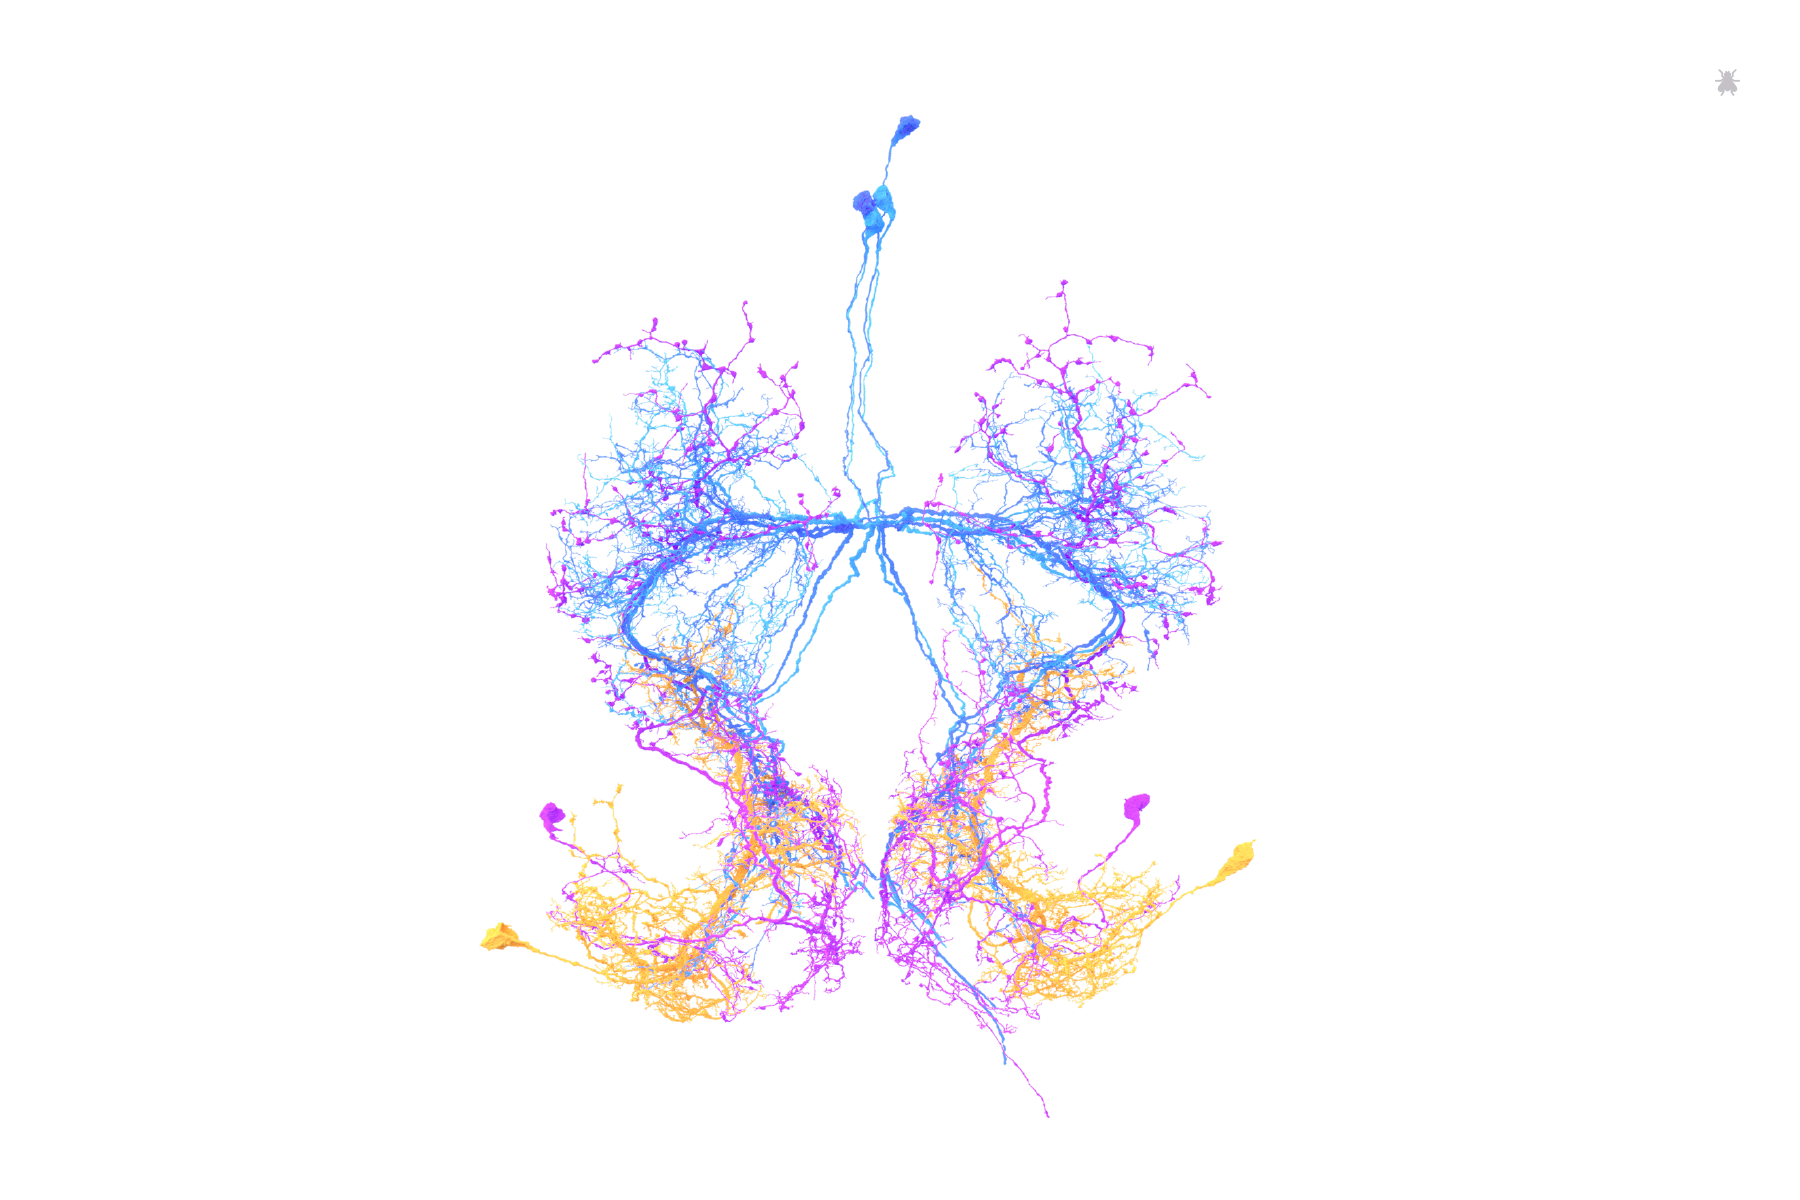 Moonwalker neurons identified and proofread by Salil Bidaye and Marieke Selcho. Rendered by Amy Sterling for FlyWire.